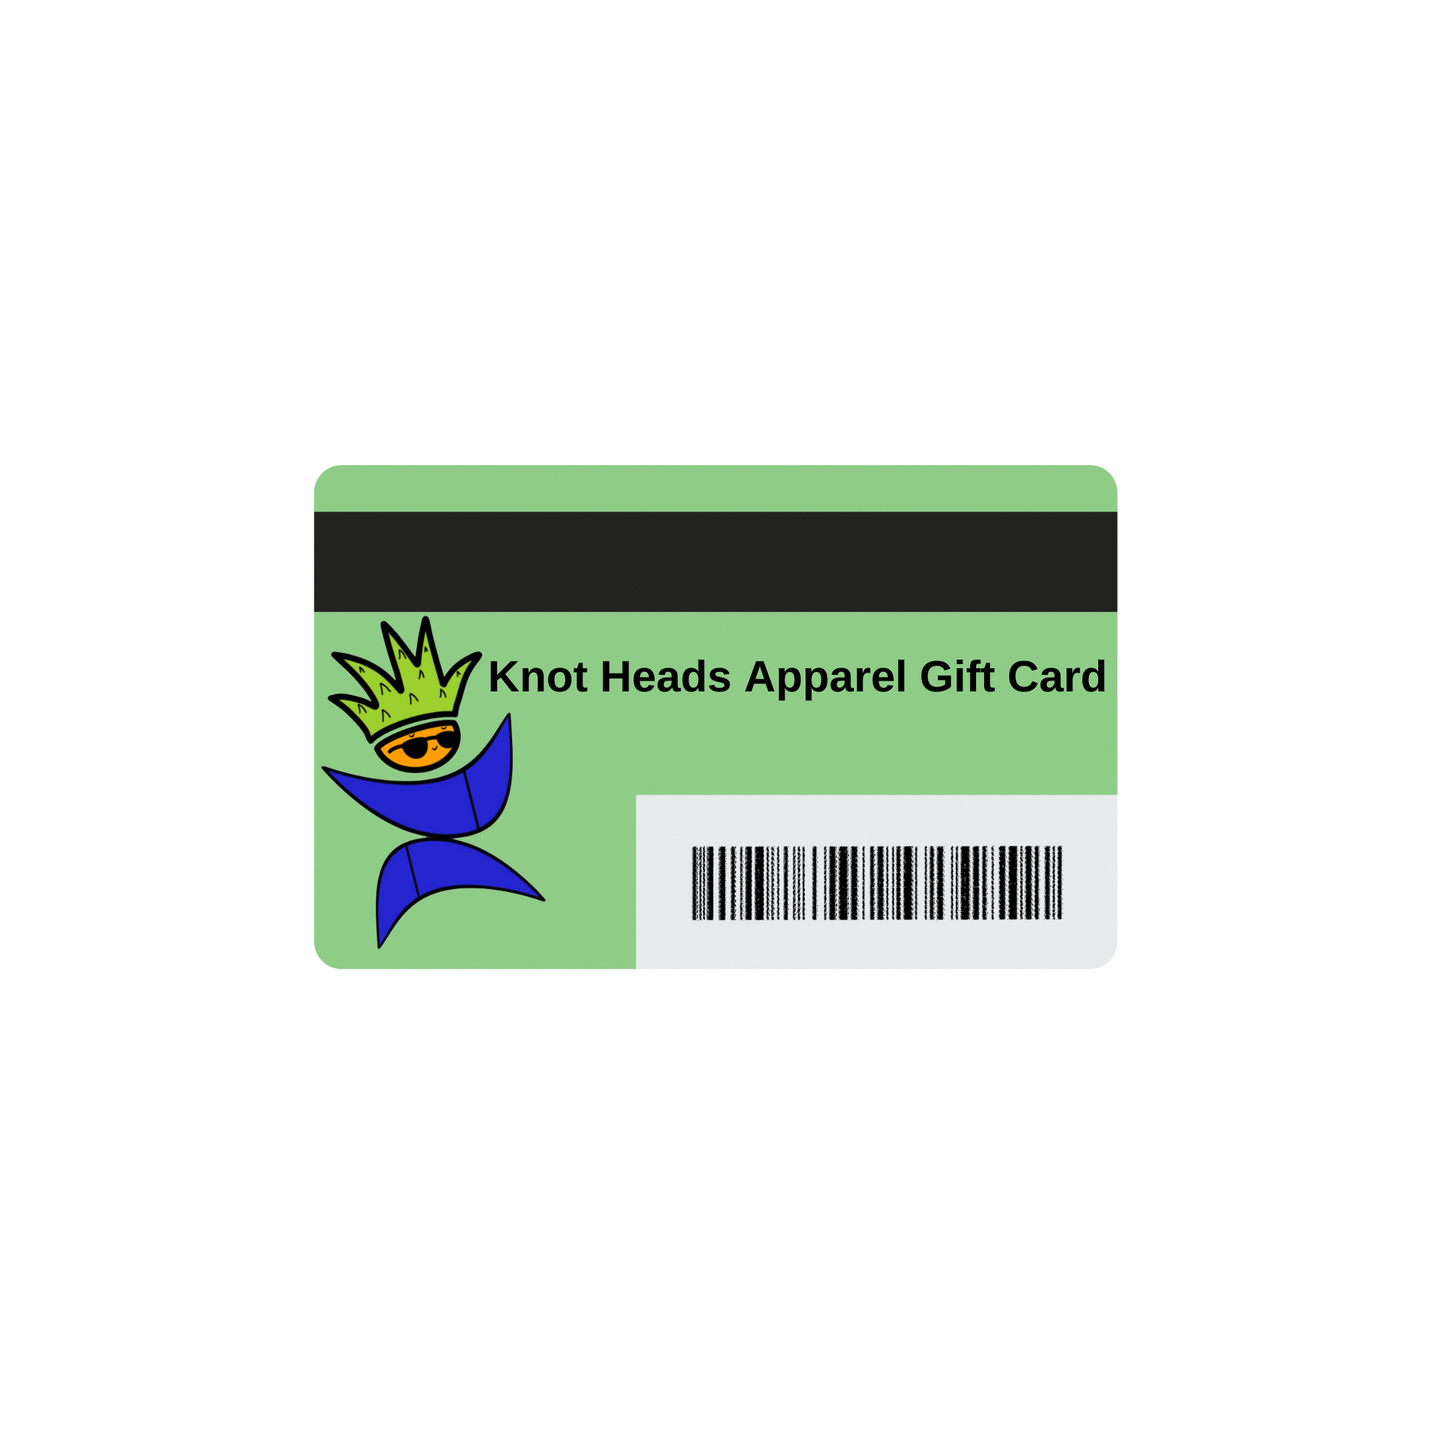 Knot Heads Apparel Gift Card